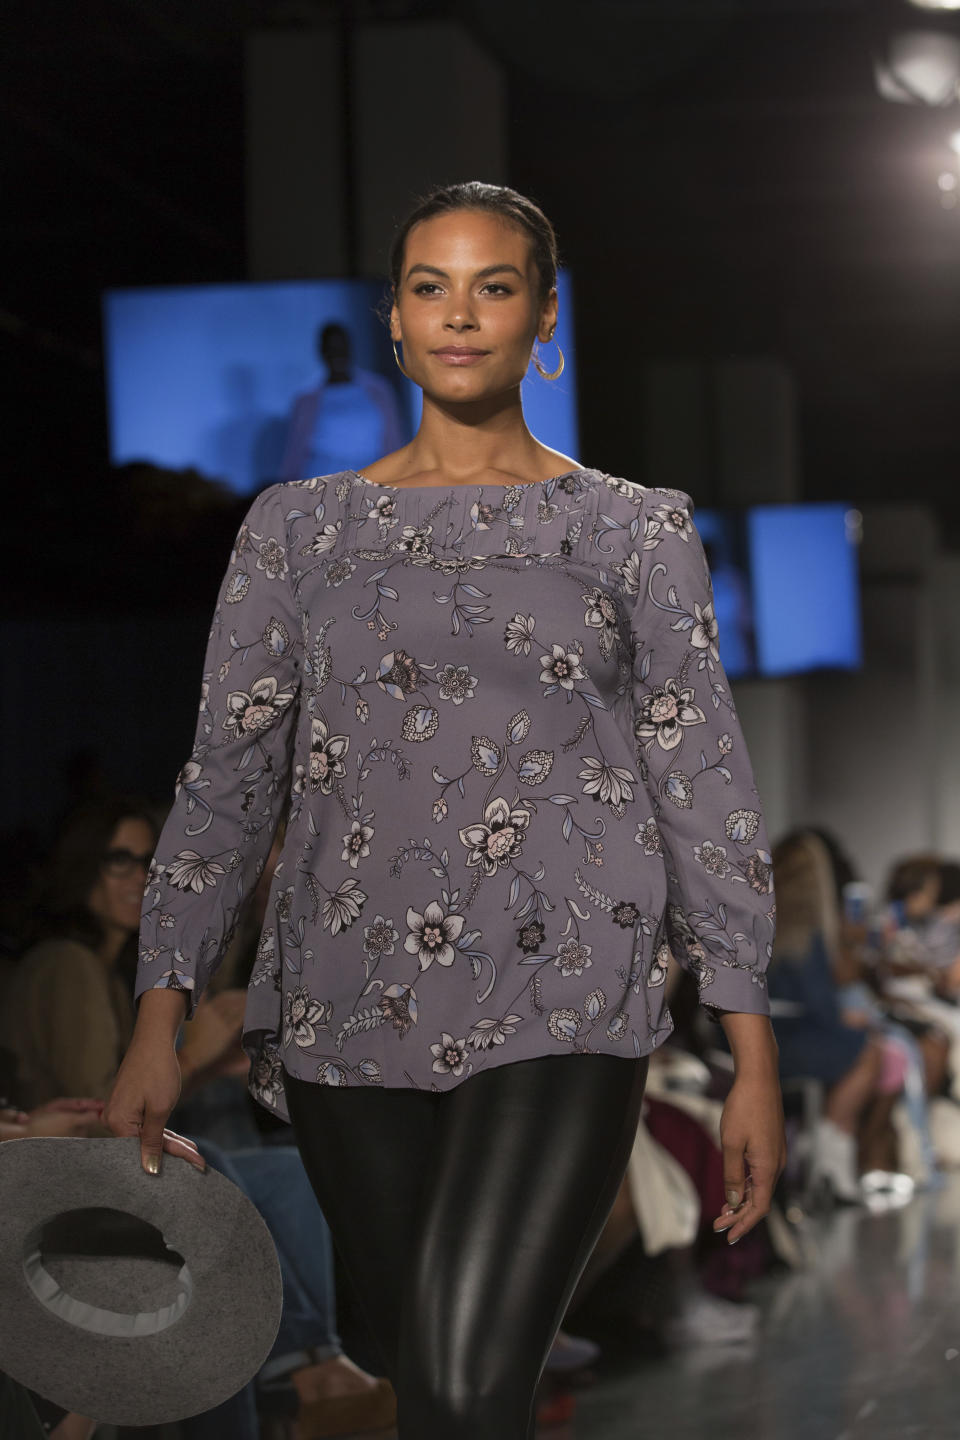 The Loft spring 2019 collection is modeled during Fashion Week Friday, Sept. 7, 2018, in New York. (AP Photo/Kevin Hagen).